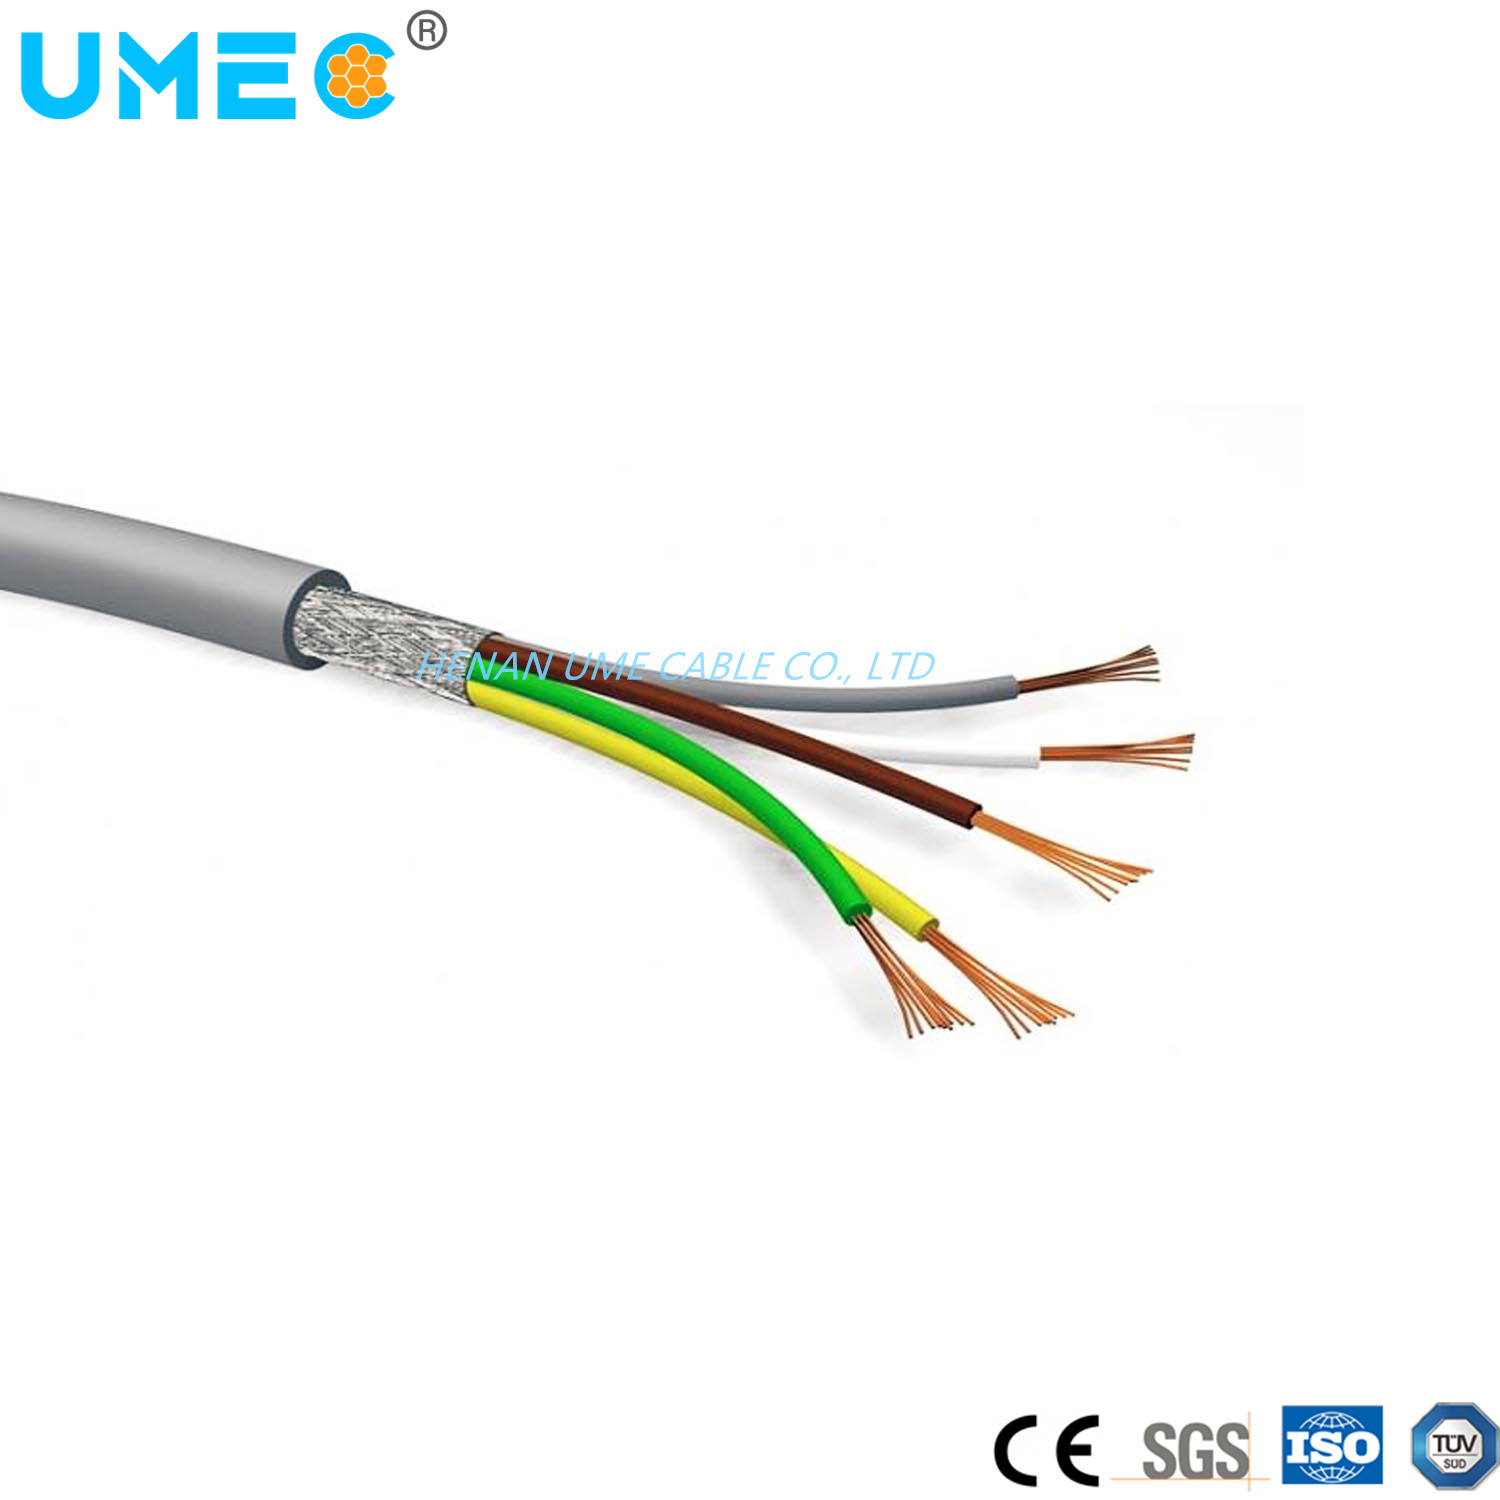 Low-Voltage 300V Communication Control Cable Multi-Pair Unshielded & Shielded Liyy/Liycy